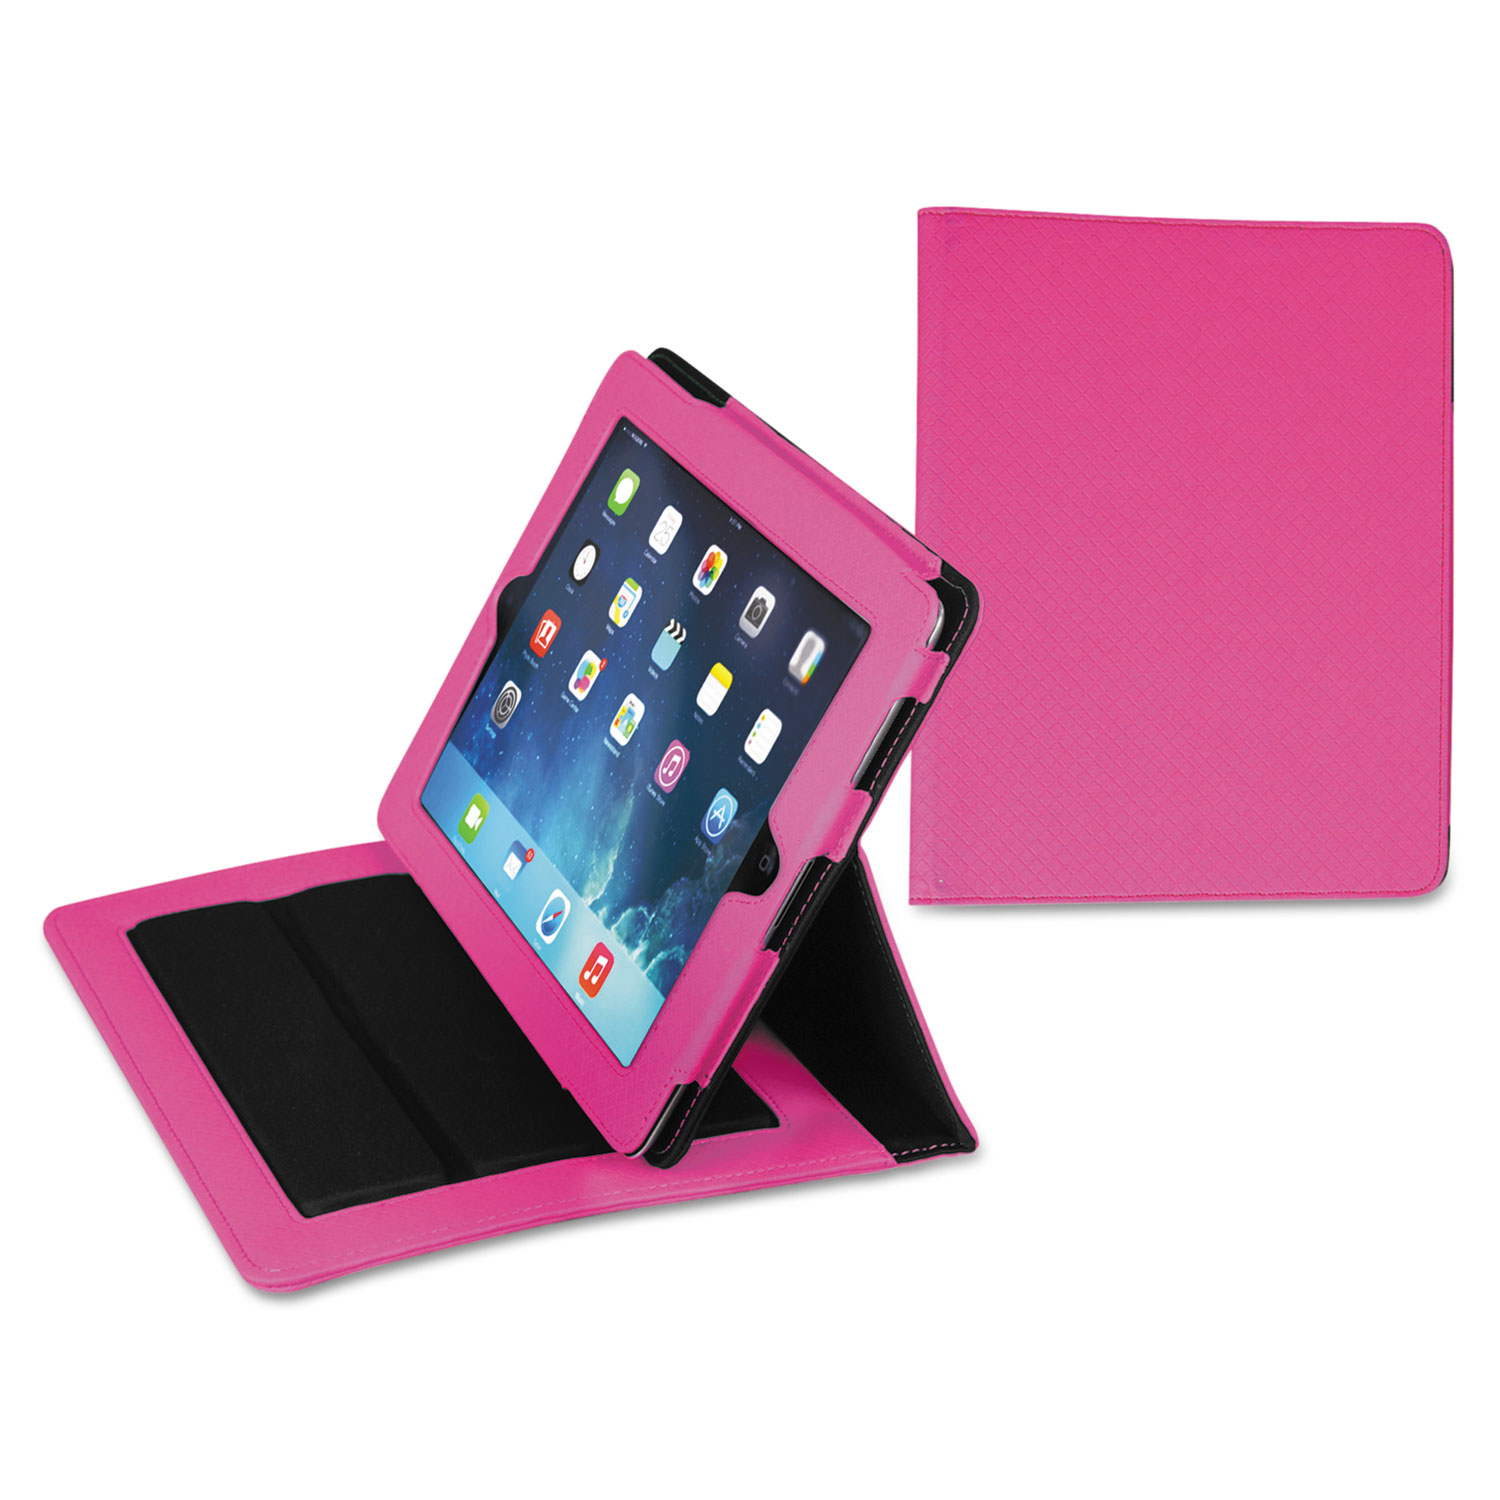 Fashion iPad Case for iPad Air, Debossed Pattern, Pink